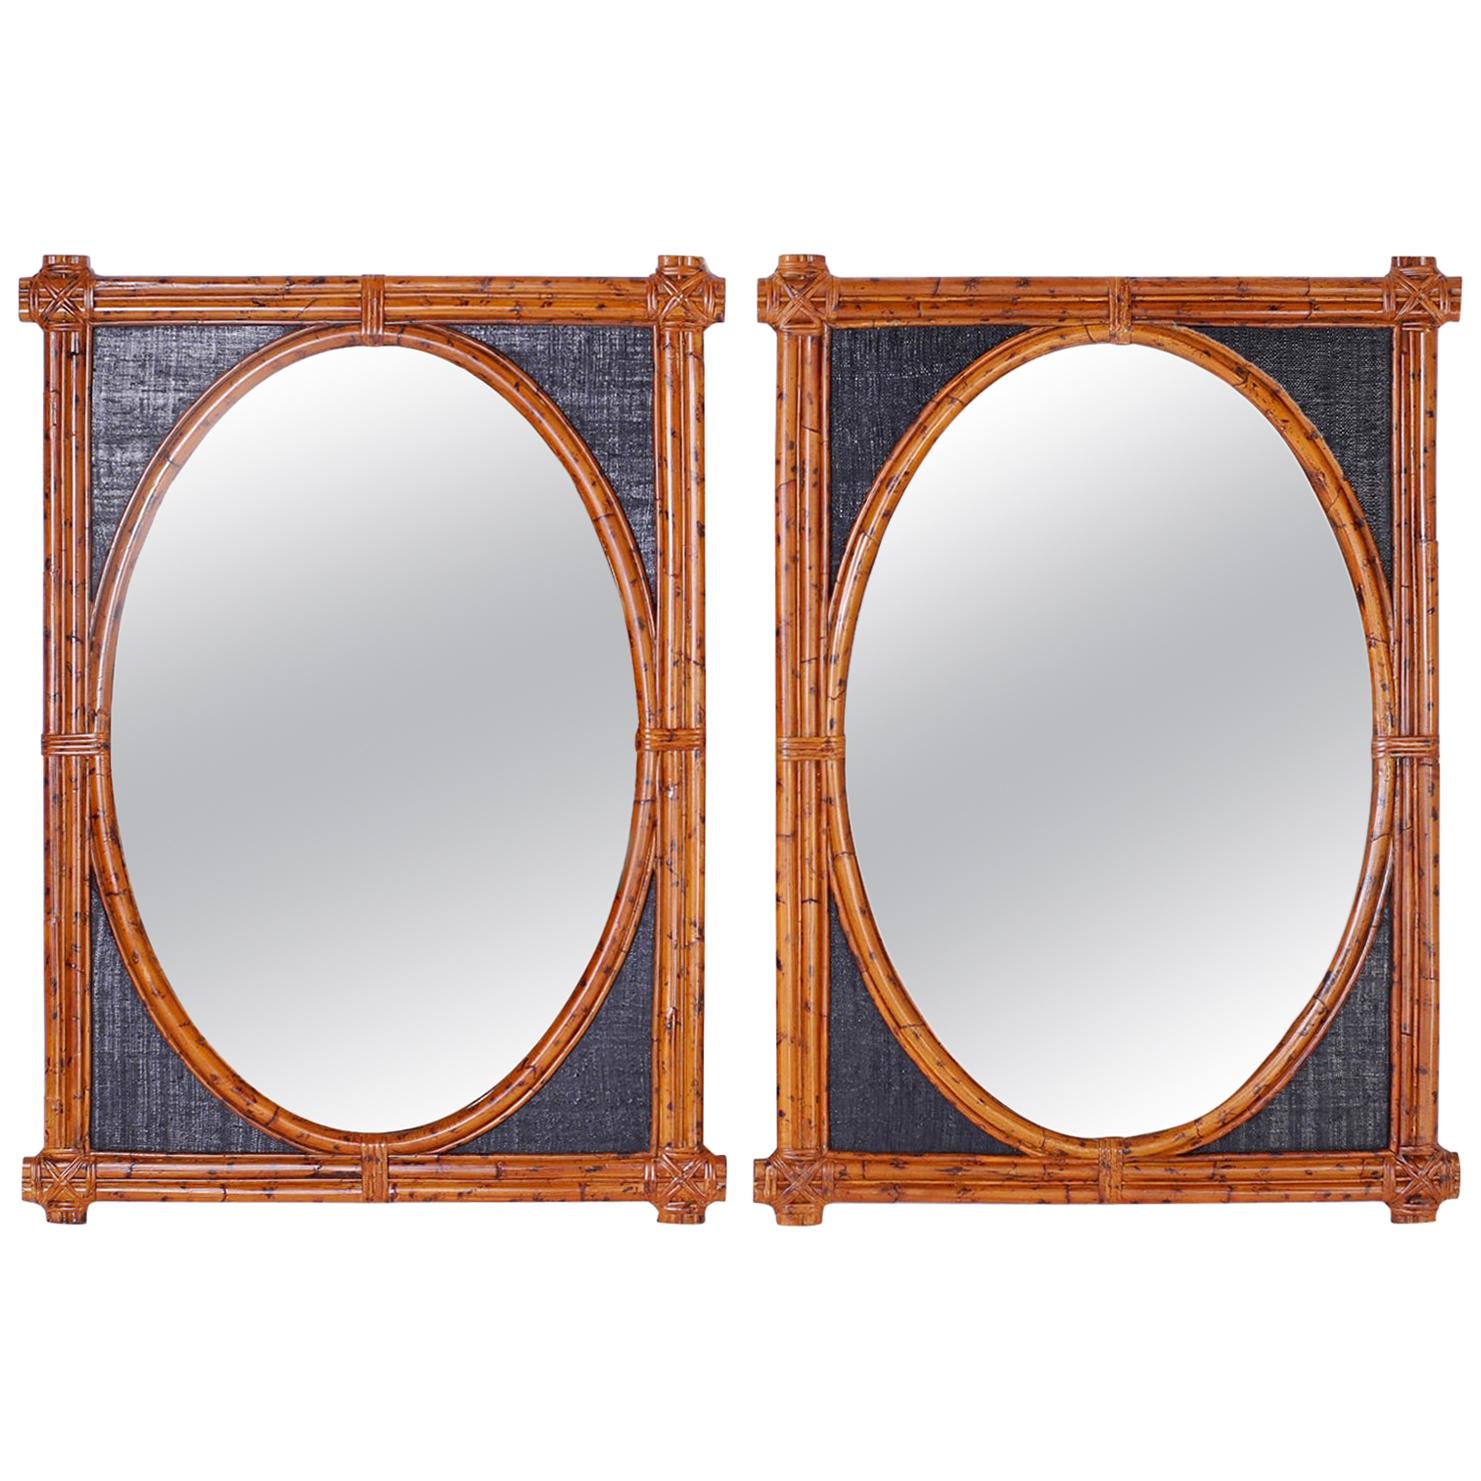 Pair of British Colonial Style Burnt Bamboo Wall Mirrors